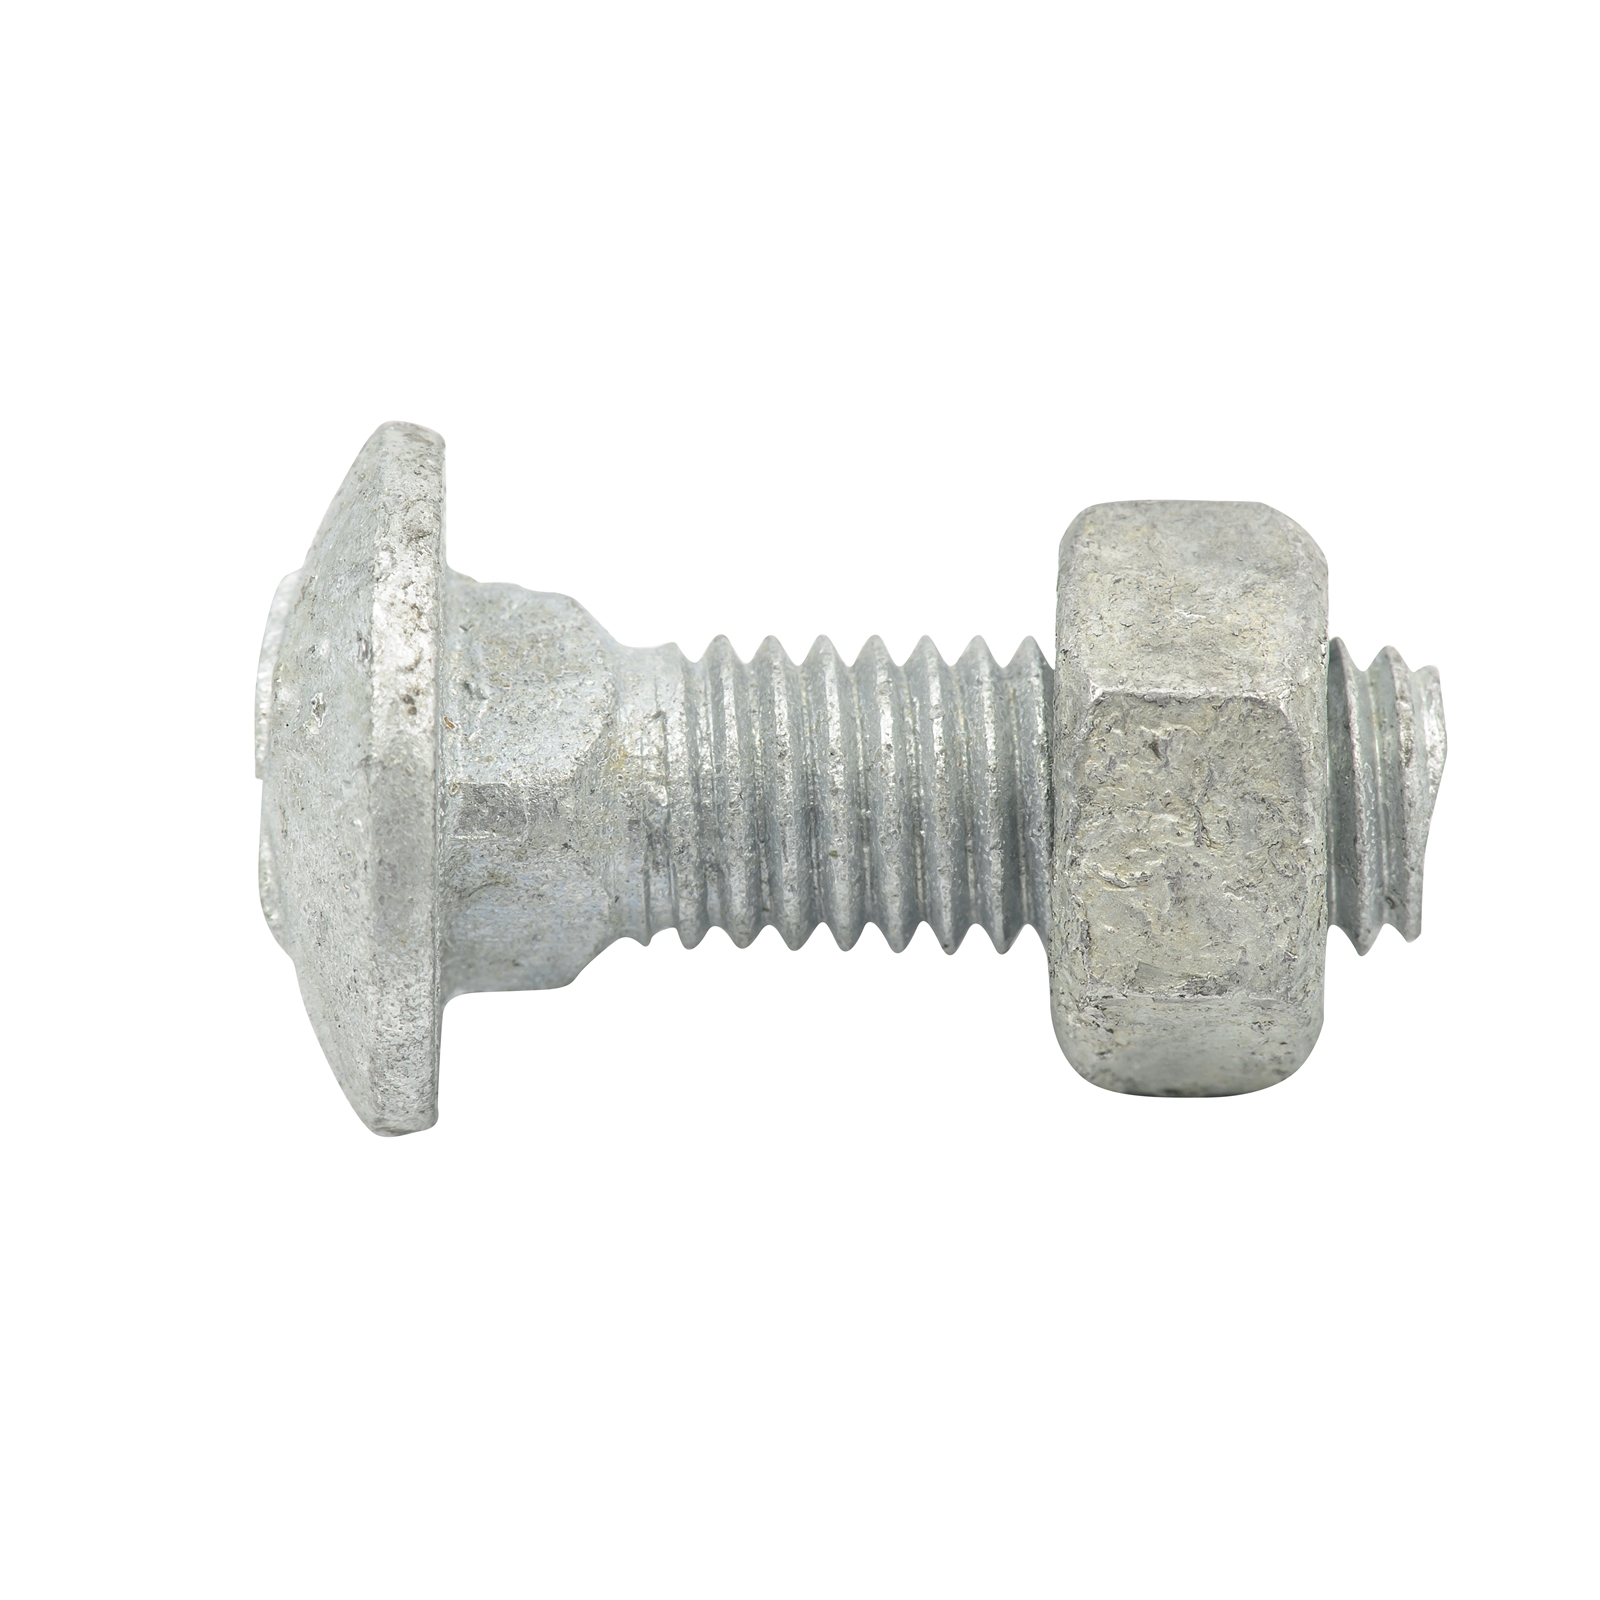 Zenith M8 x 25mm Galvanised Cup Head Bolt and Nut